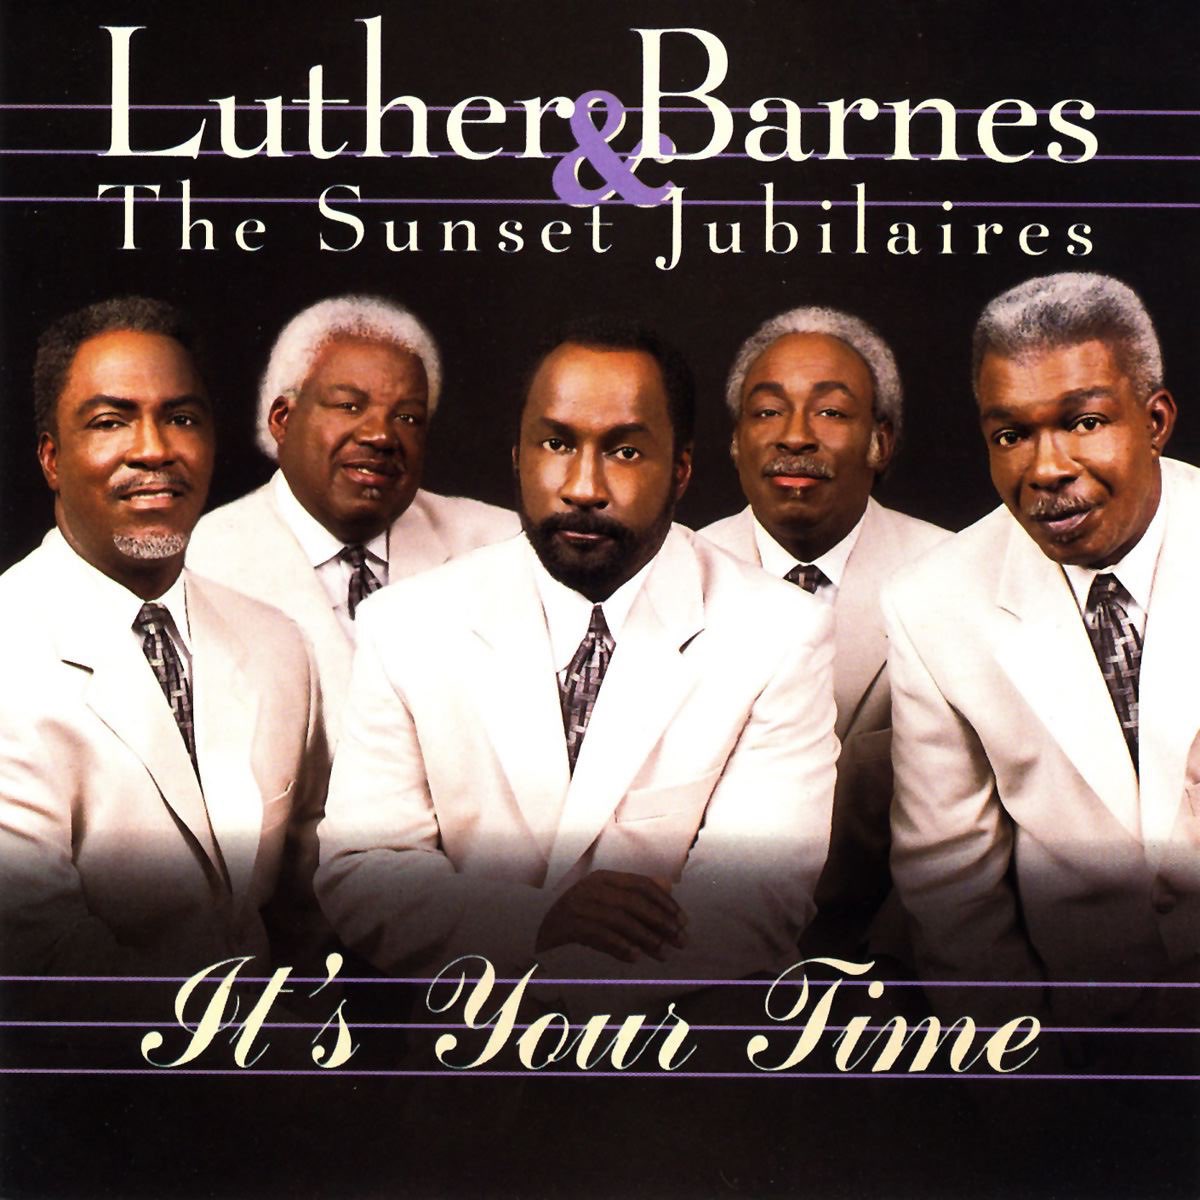 Luther Barnes & The Sunset Jubilaires